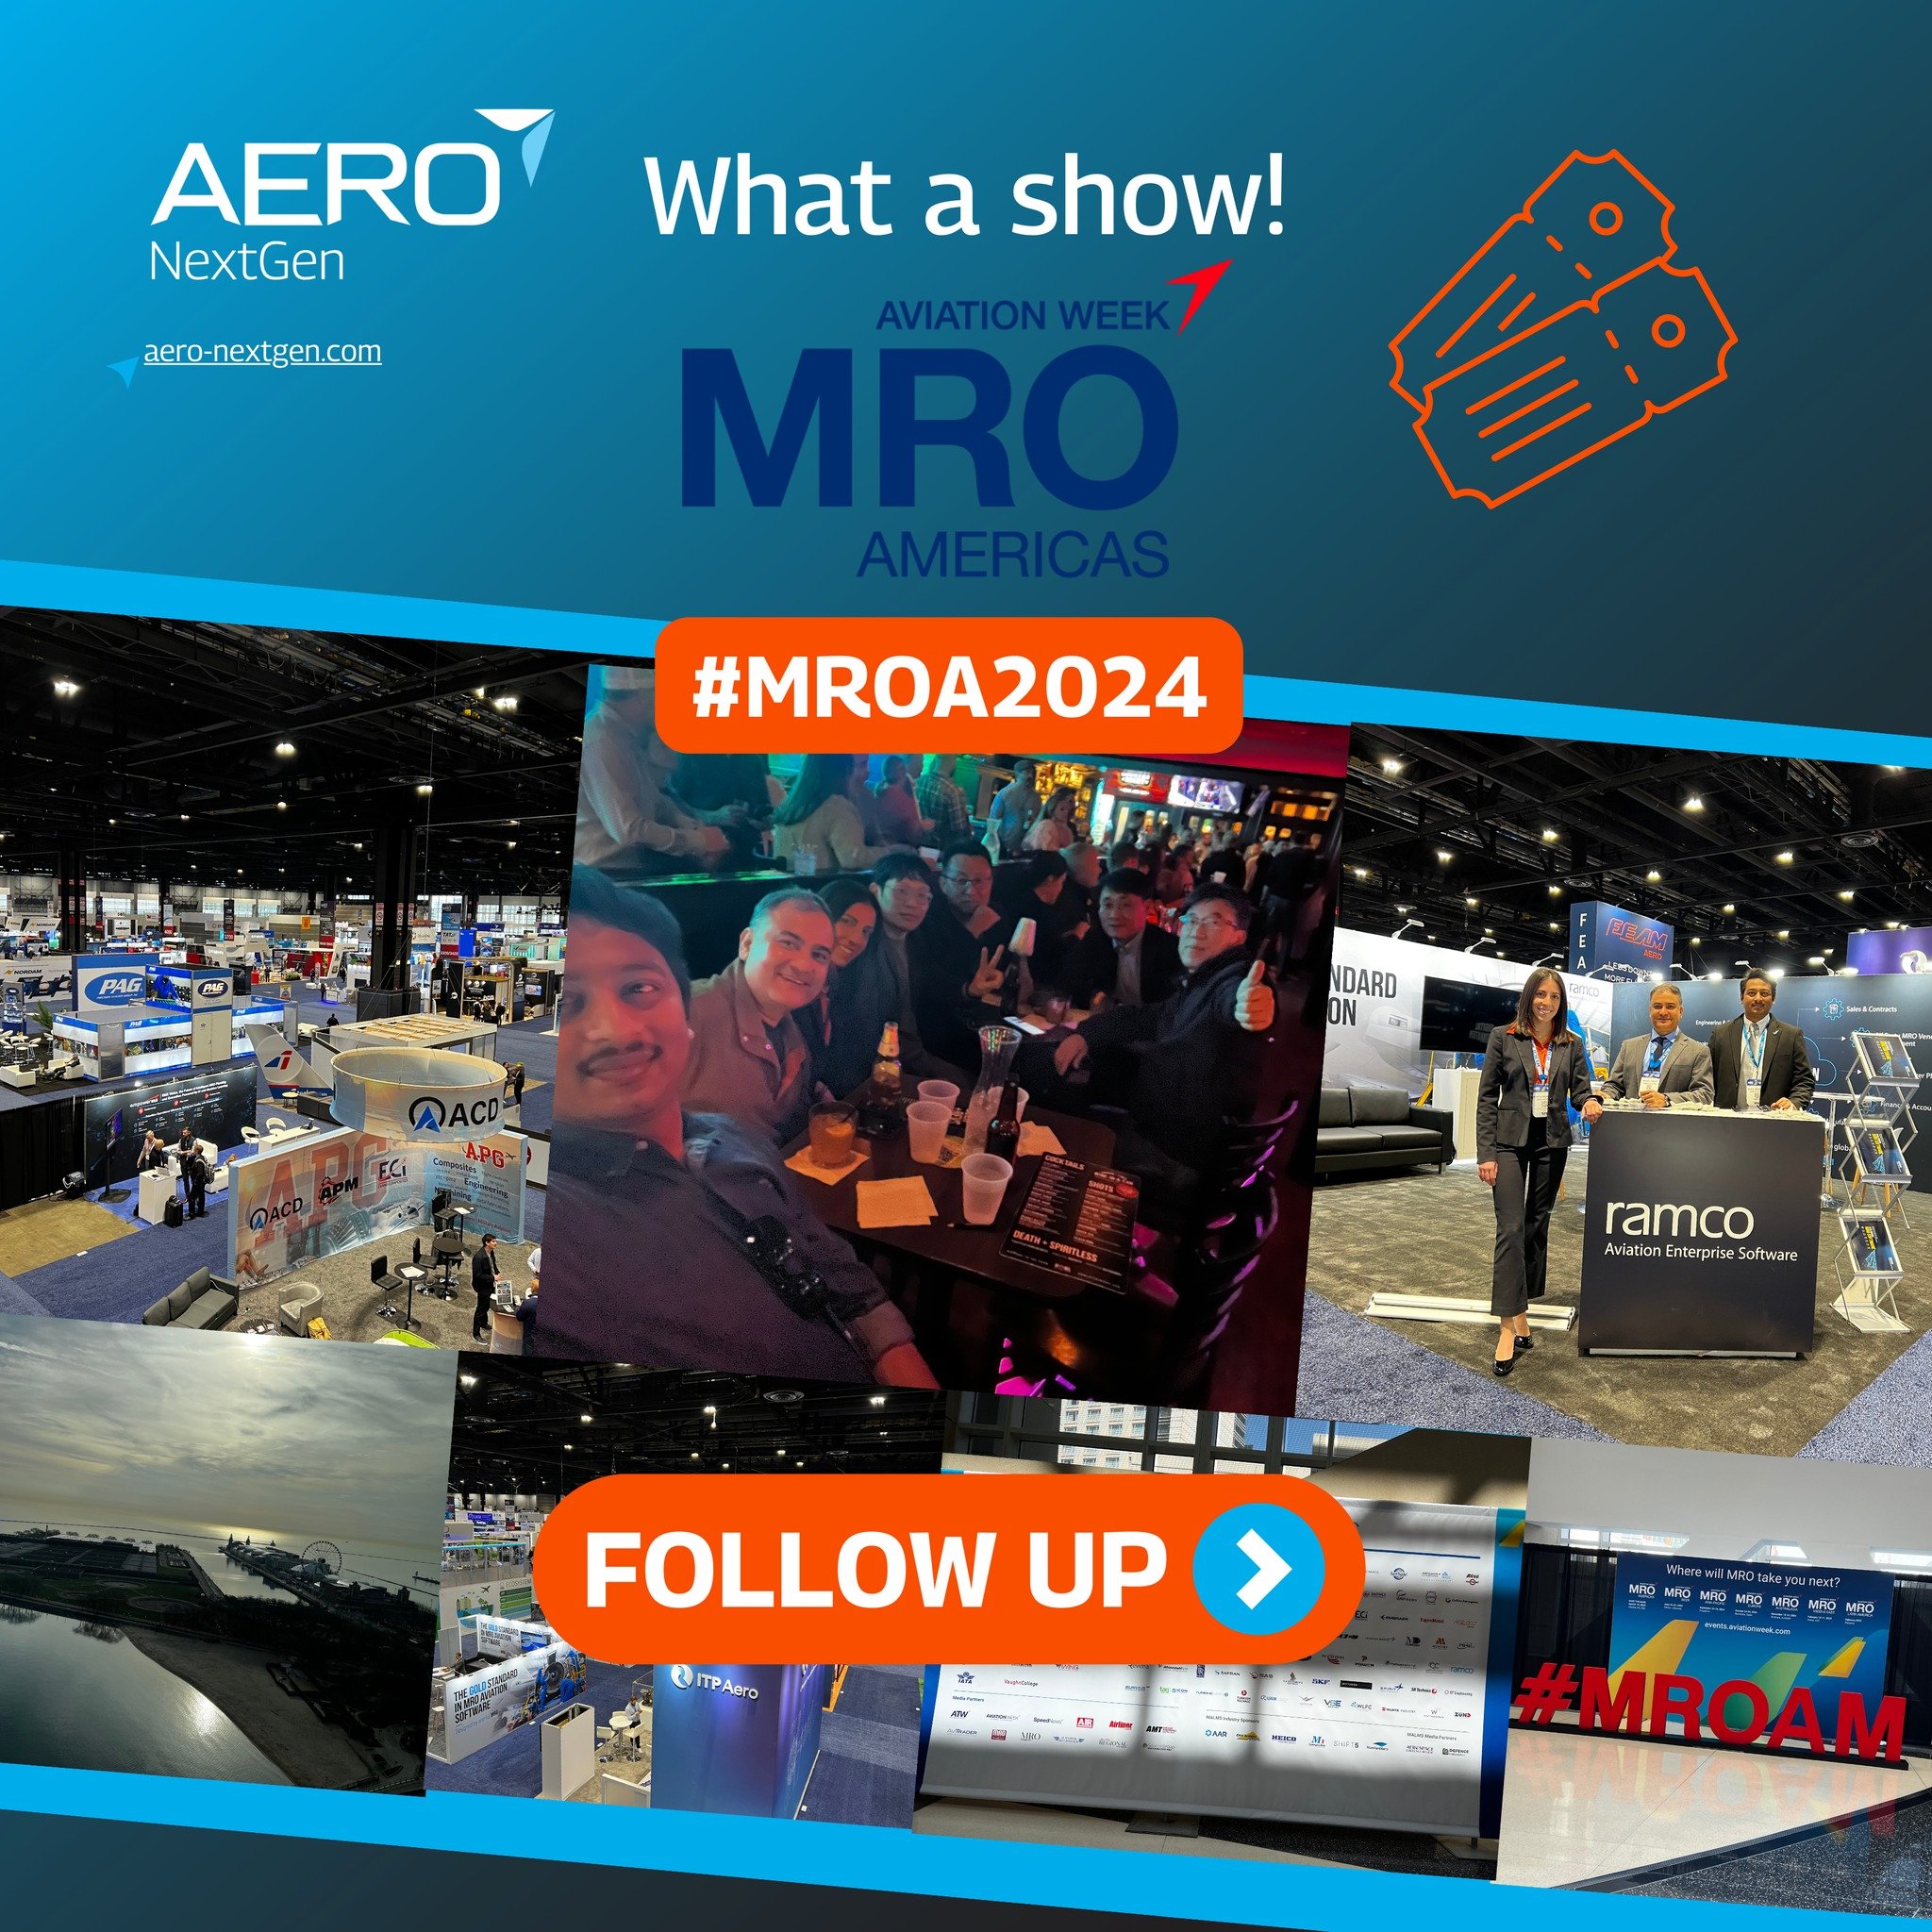 WHAT A SHOW | Wrapping Up MRO Americas in Chicago 🌟✈️

It was a privilege to connect with industry experts and explore new opportunities.

A heartfelt thank you to everyone who stopped by, and shared their vision for the future of aviation maintenan